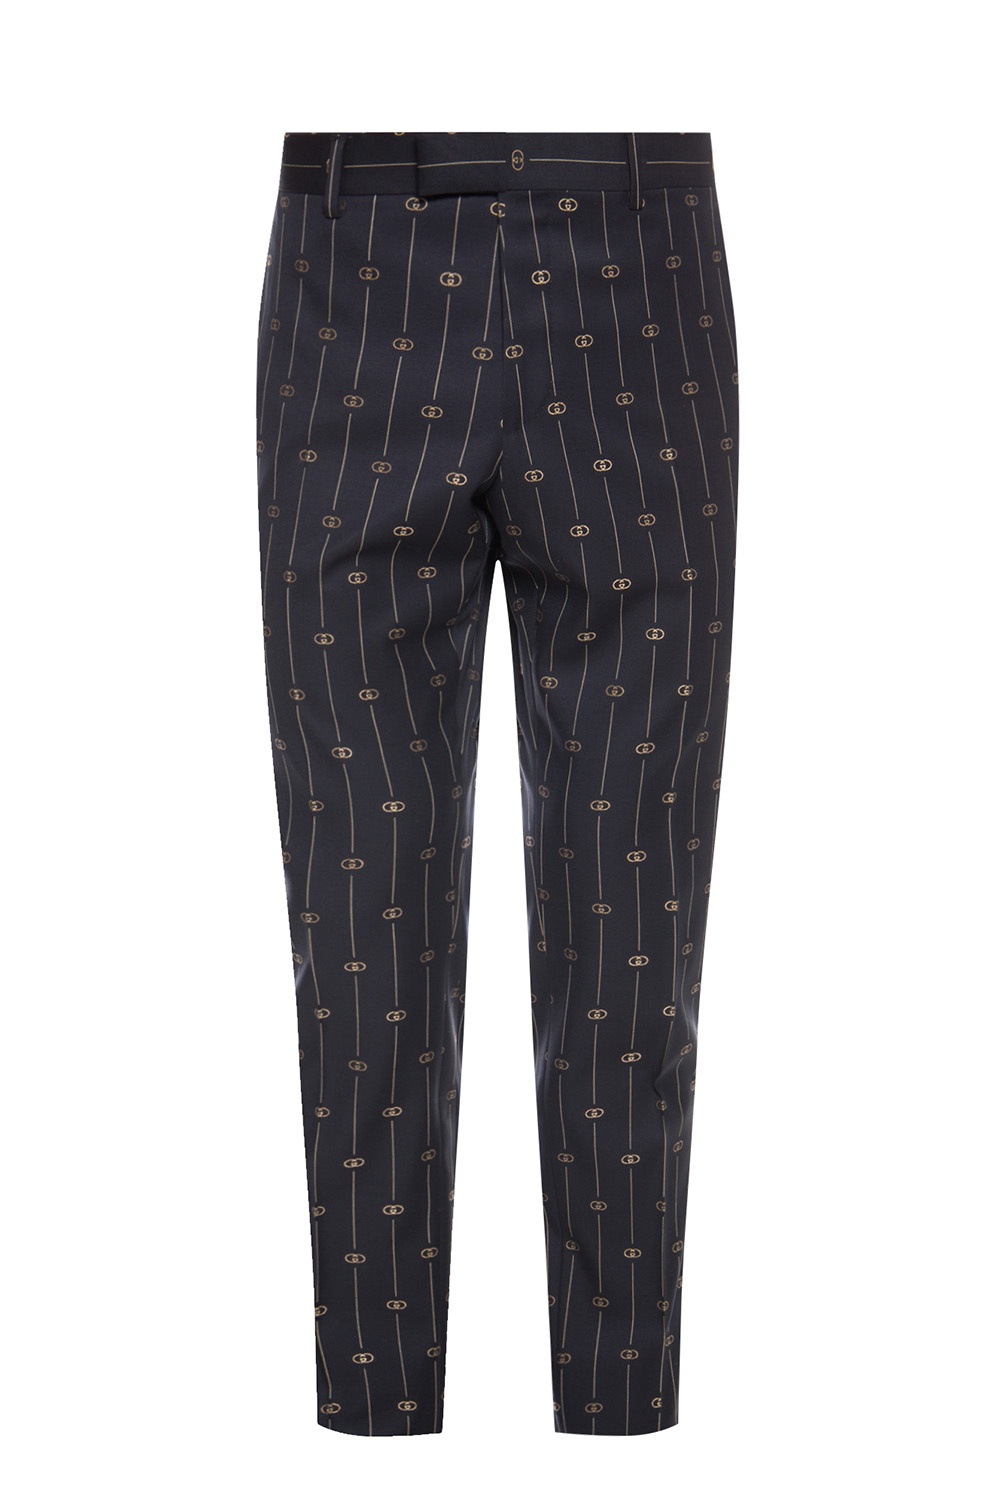 Gucci Releases GG Monogrammed Pattern Suit – PAUSE Online